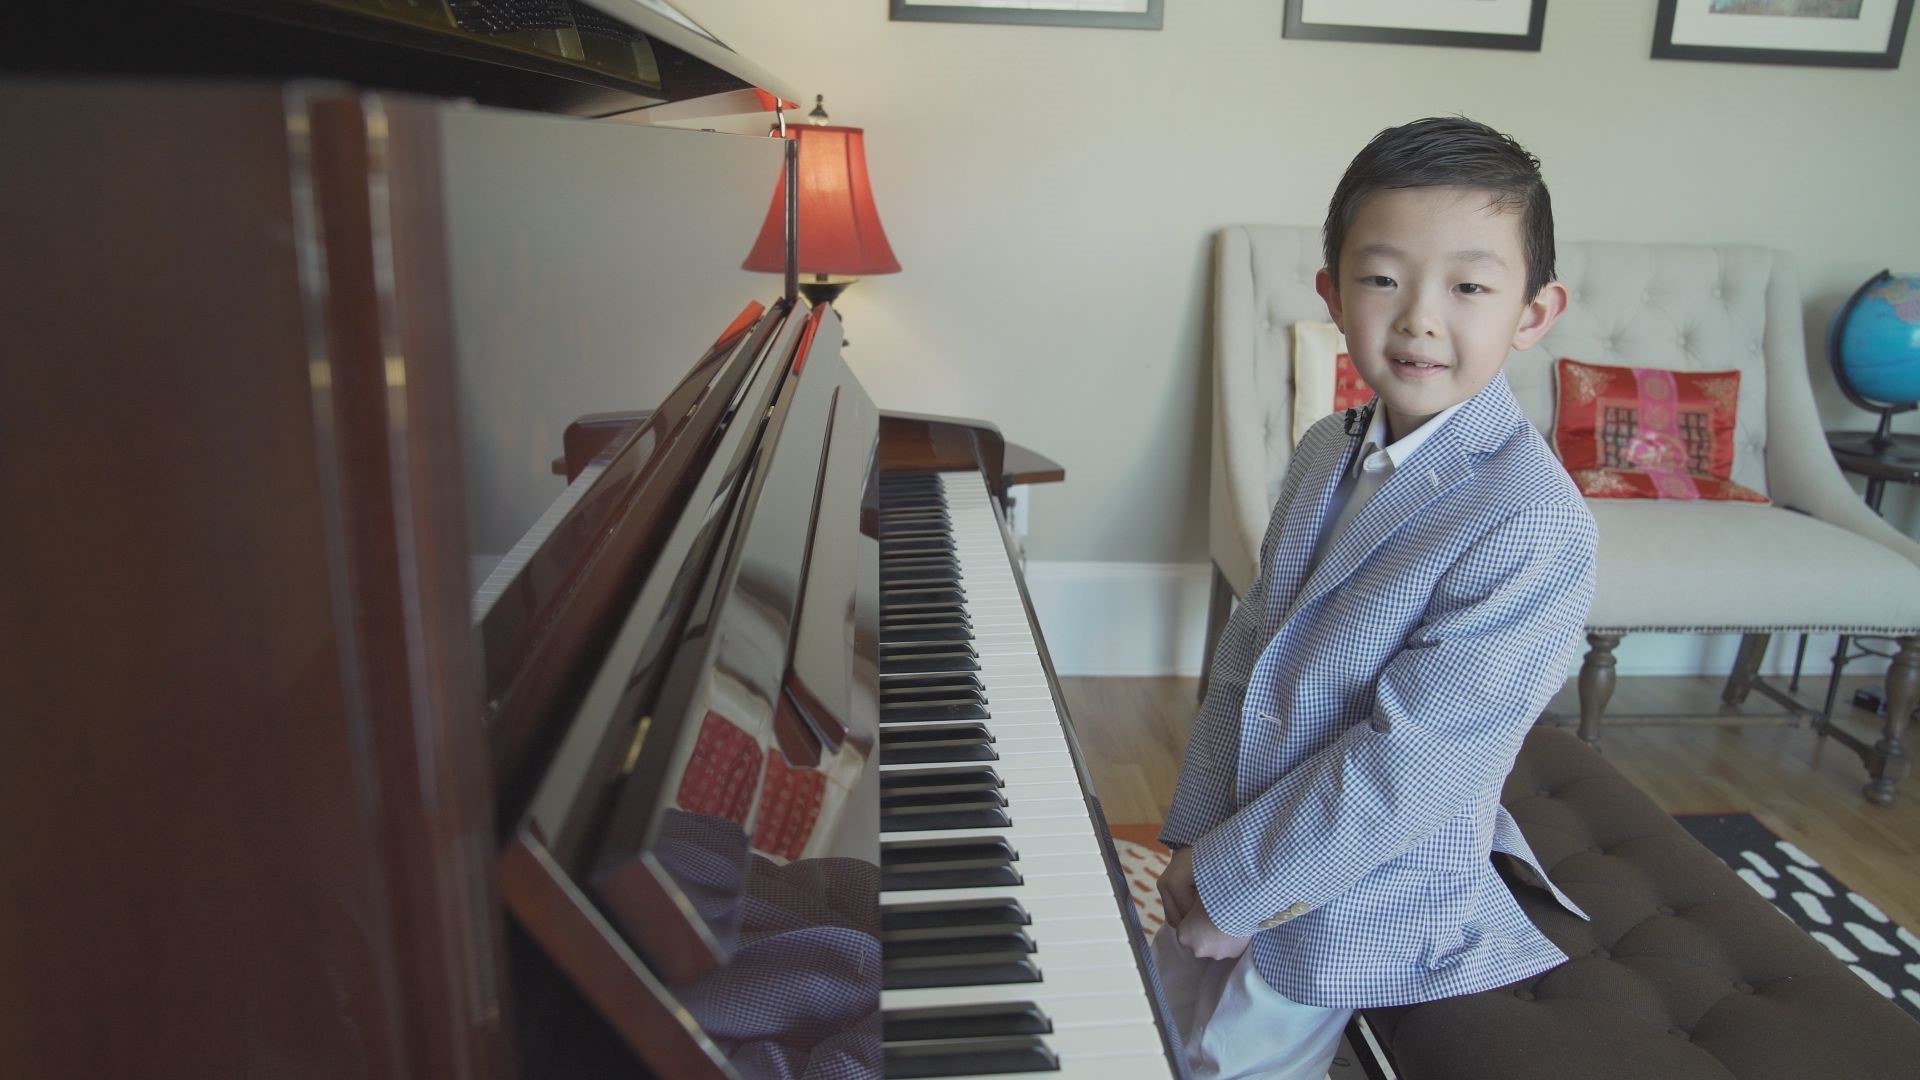 There's something people notice about William Zhang ... something besides his prowess at the piano, his instinct for Mozart, and his six years of age.